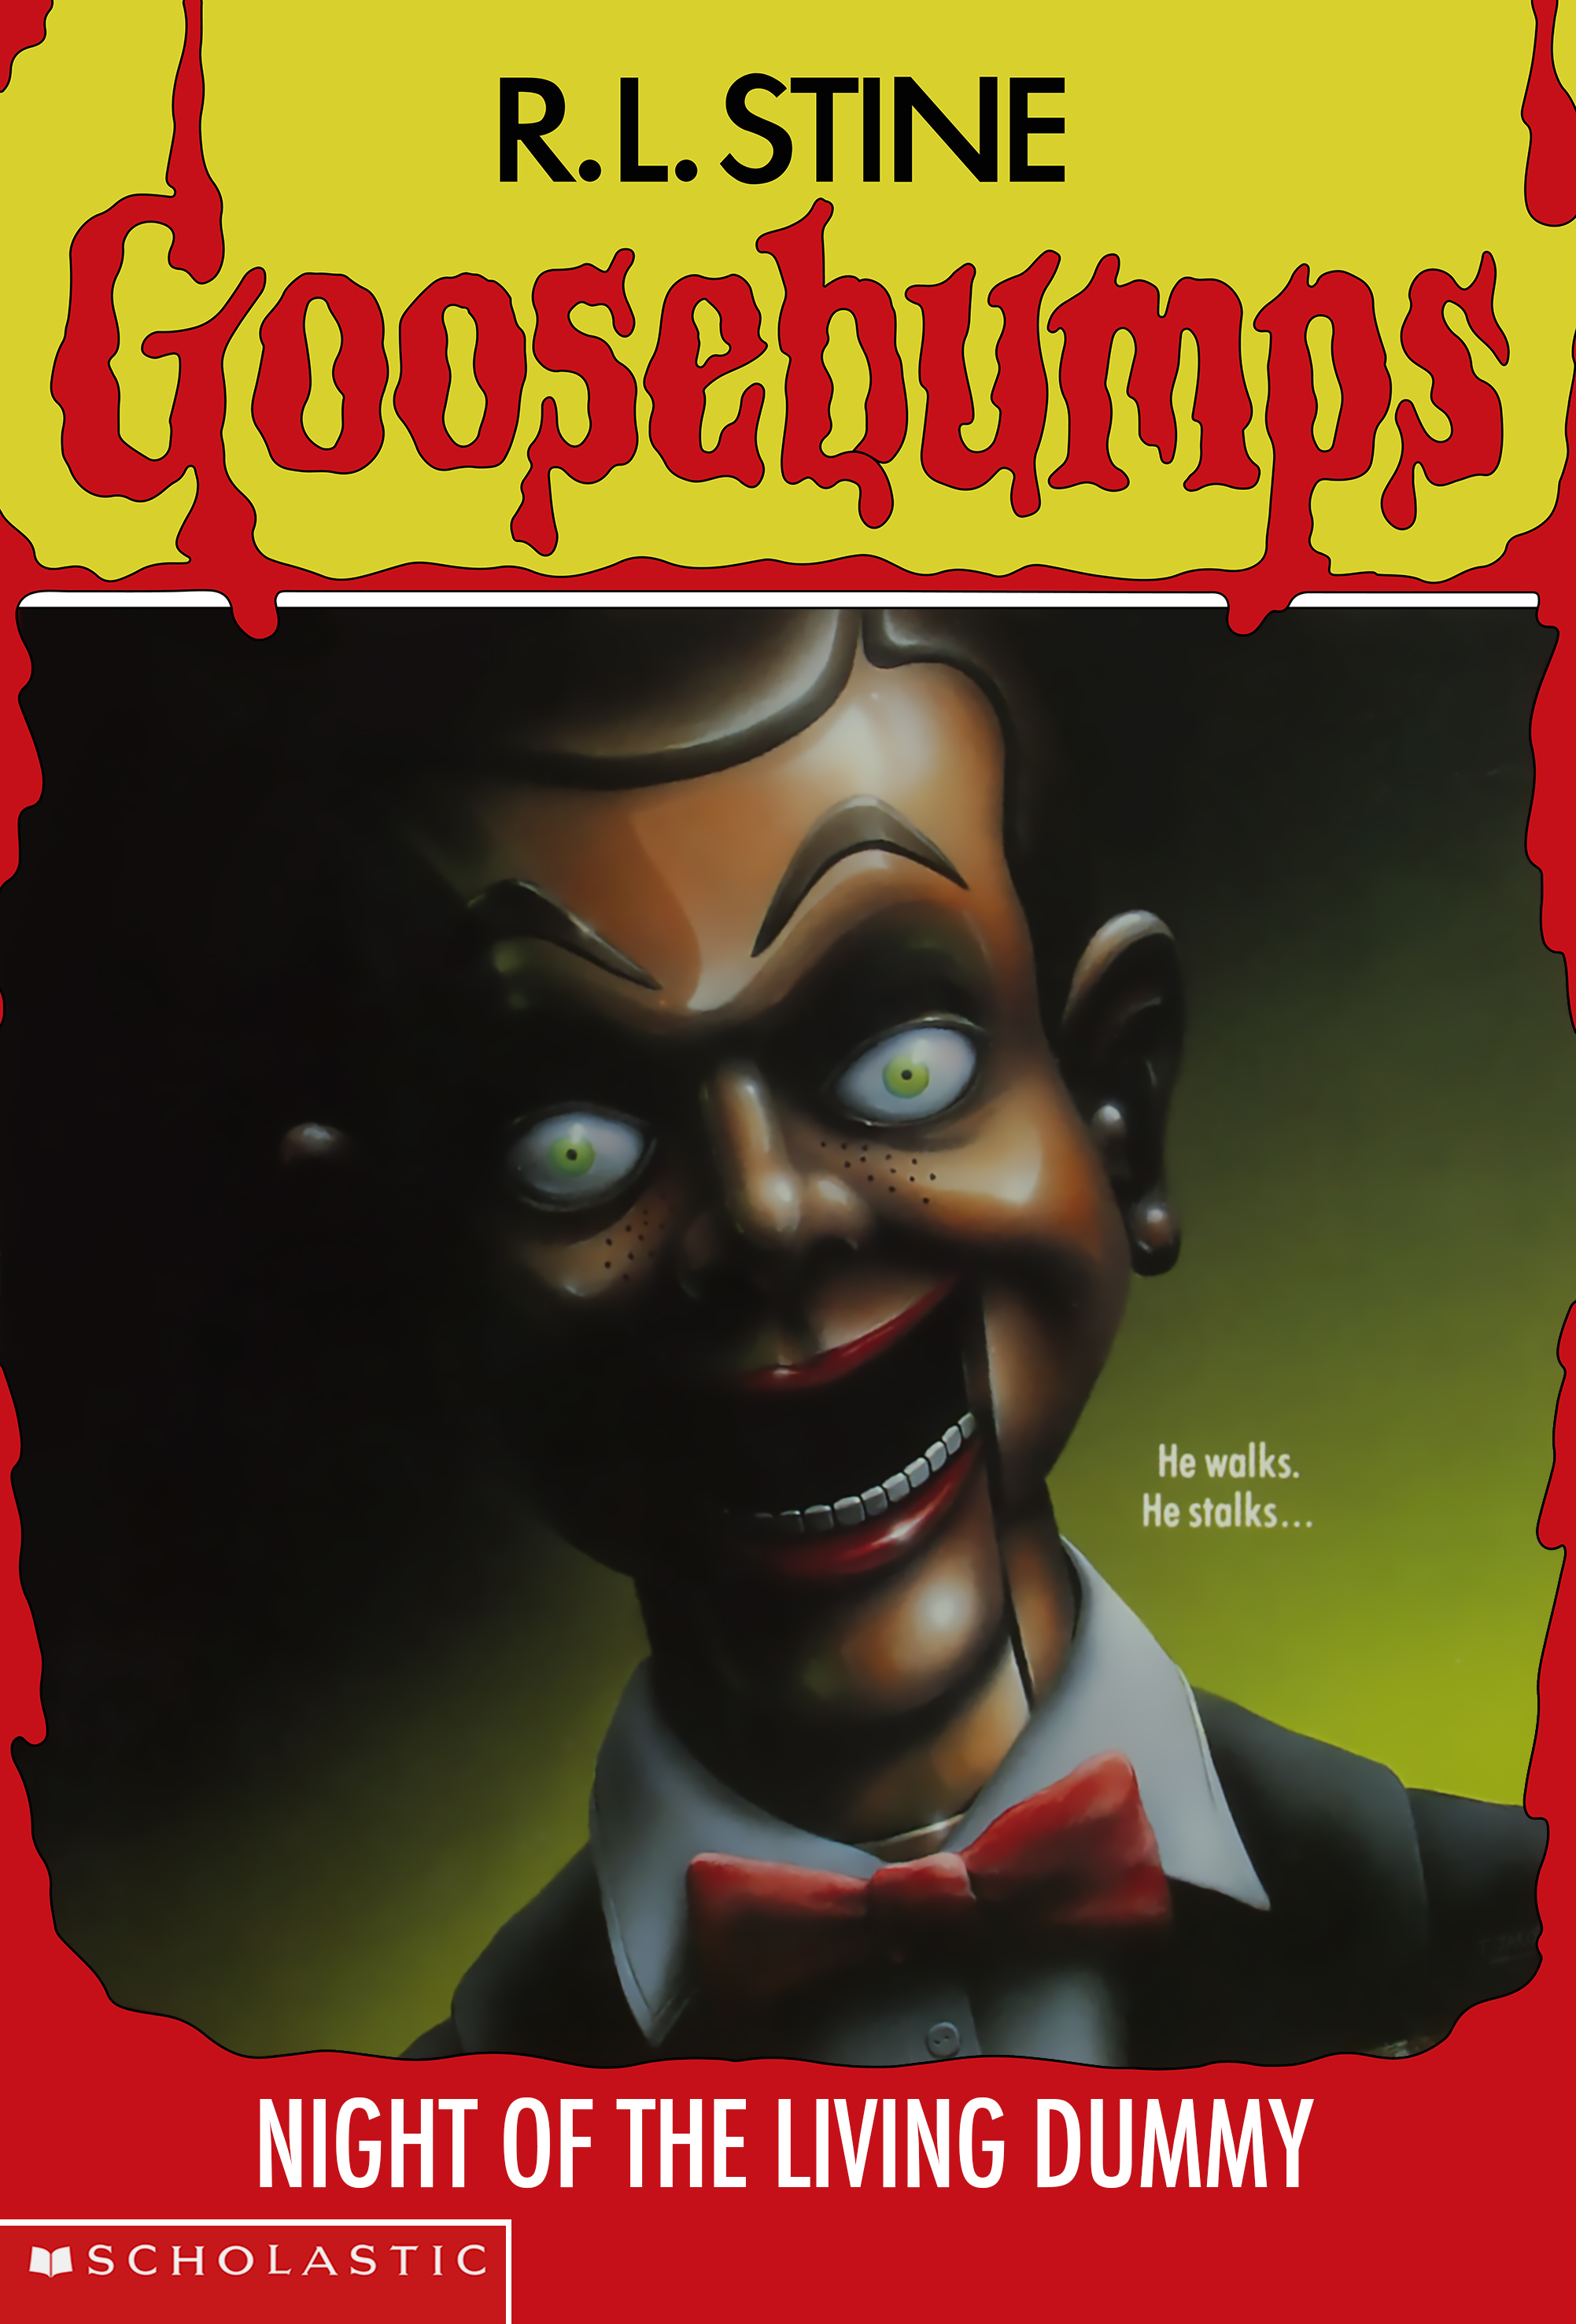 Goosebumps Images Night Of The Living Dummy HD Wallpaper And